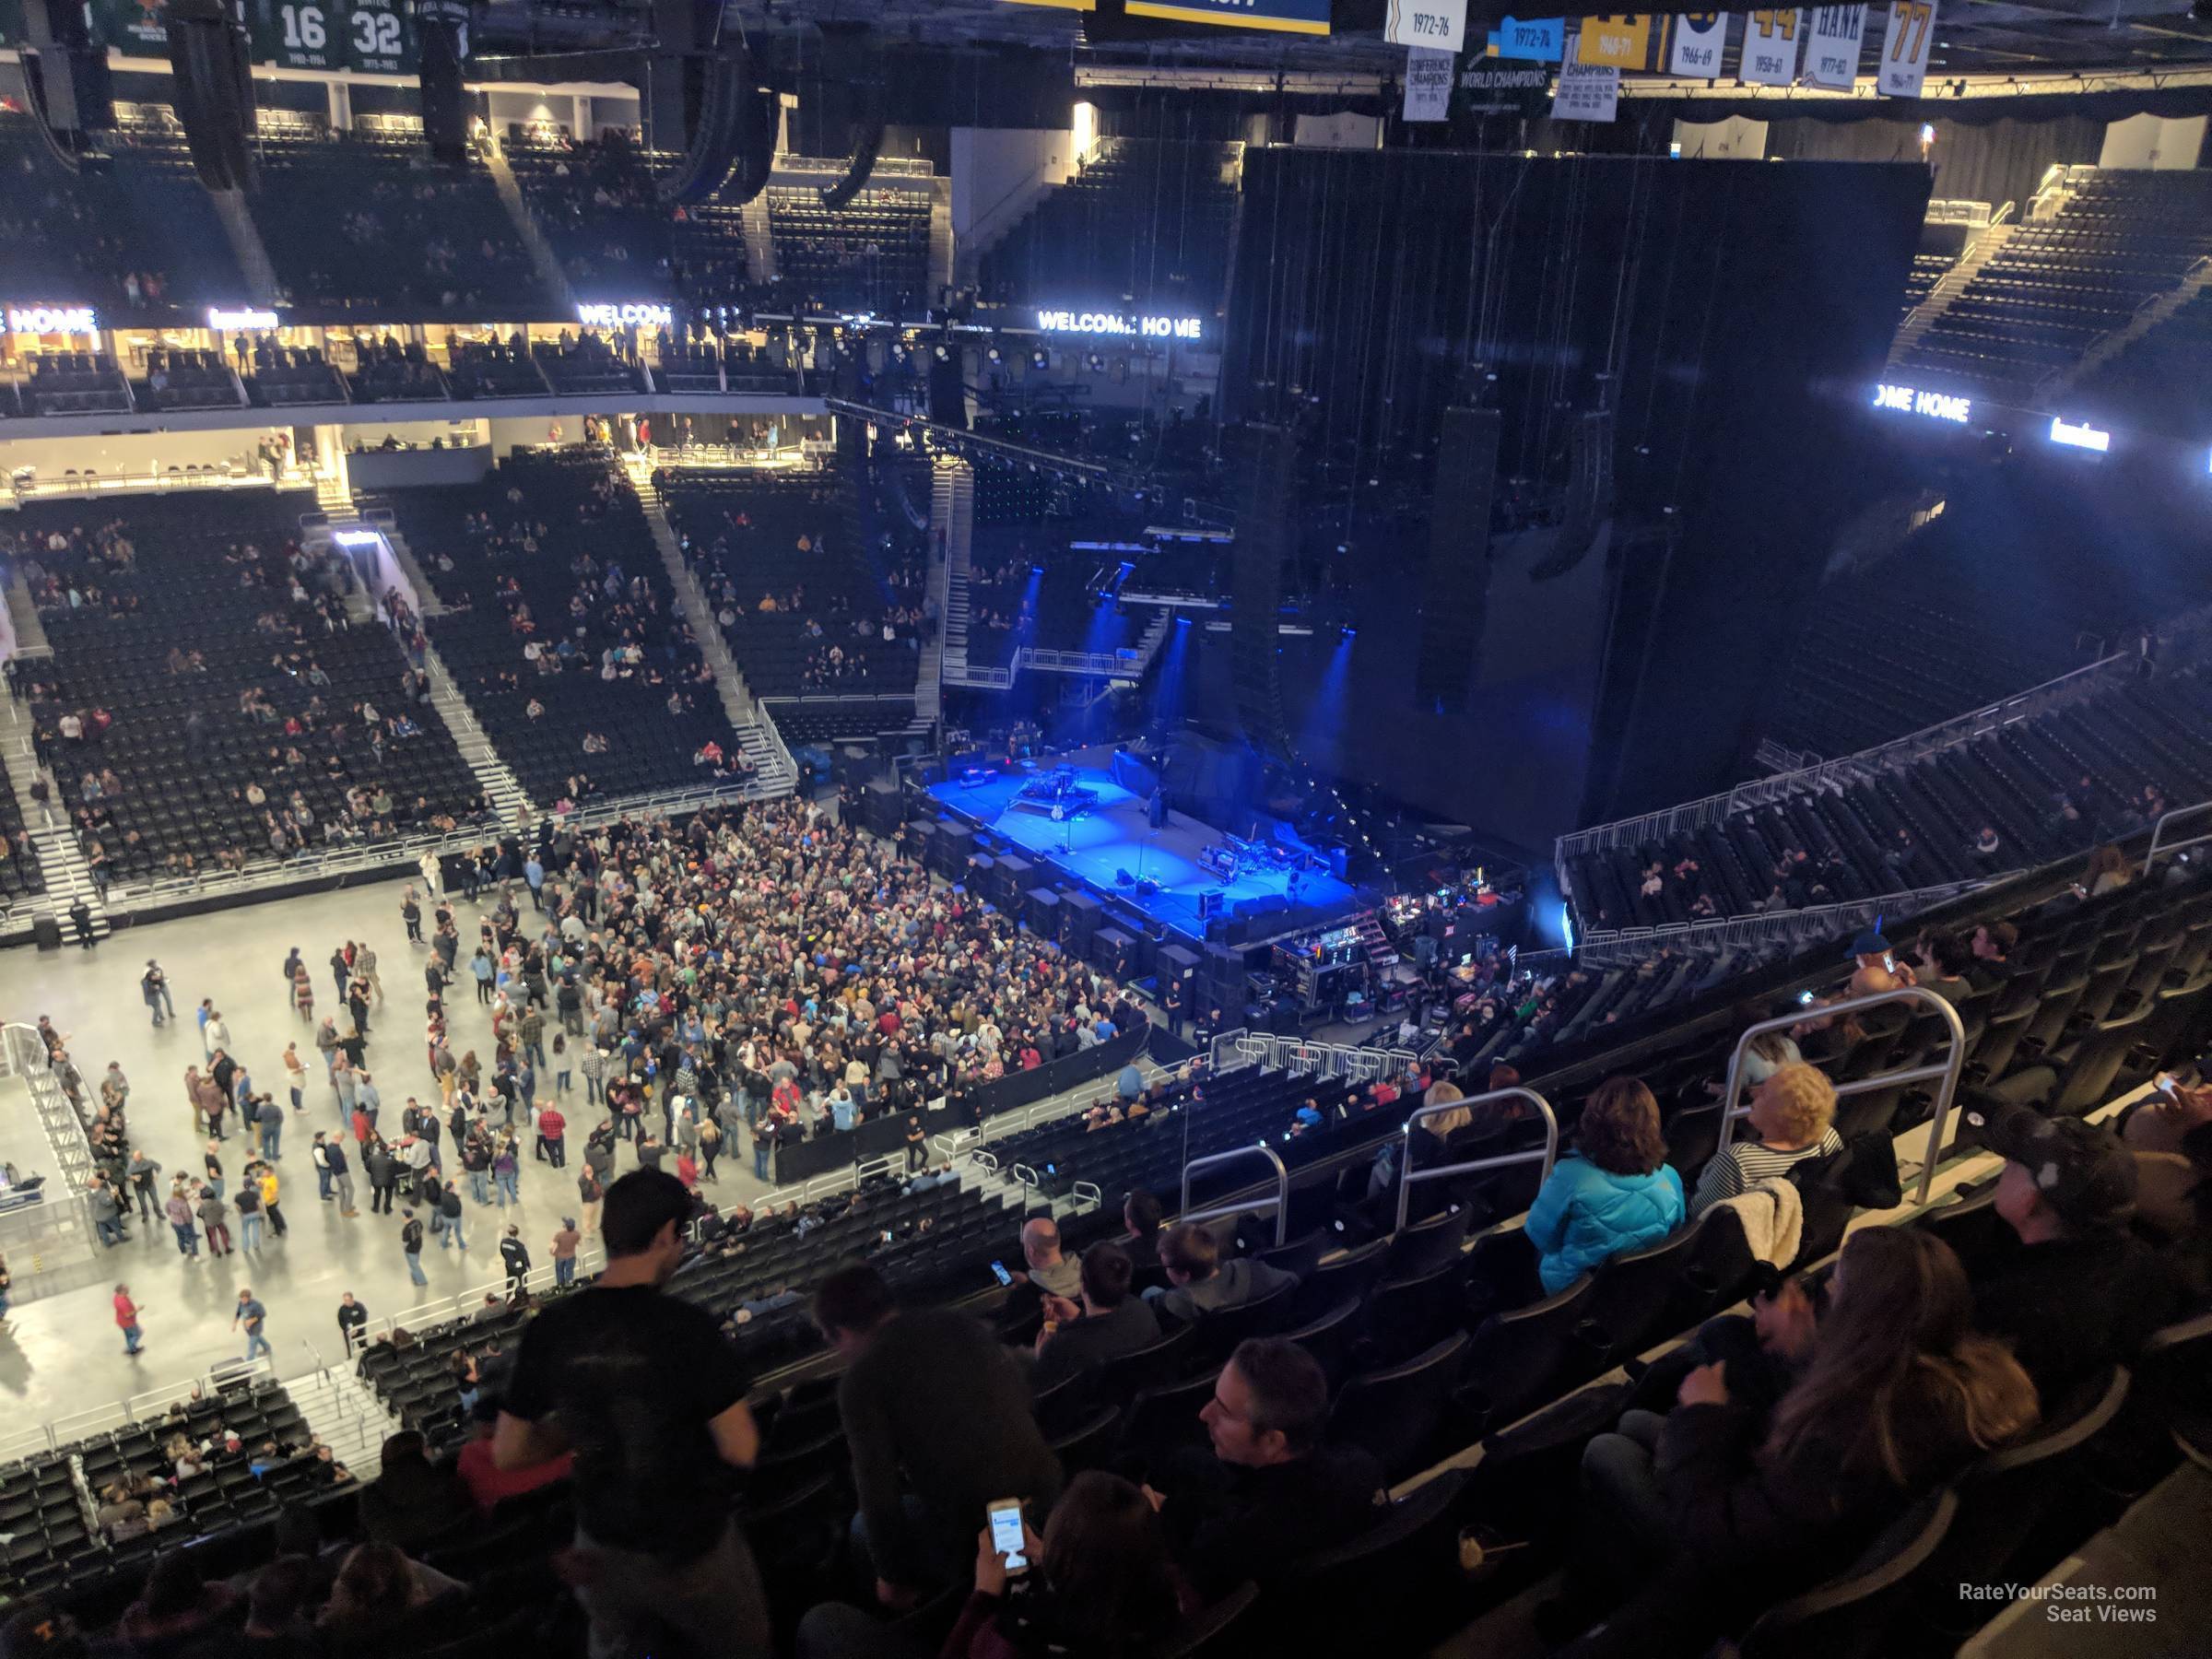 section 223, row 10 seat view  for concert - fiserv forum